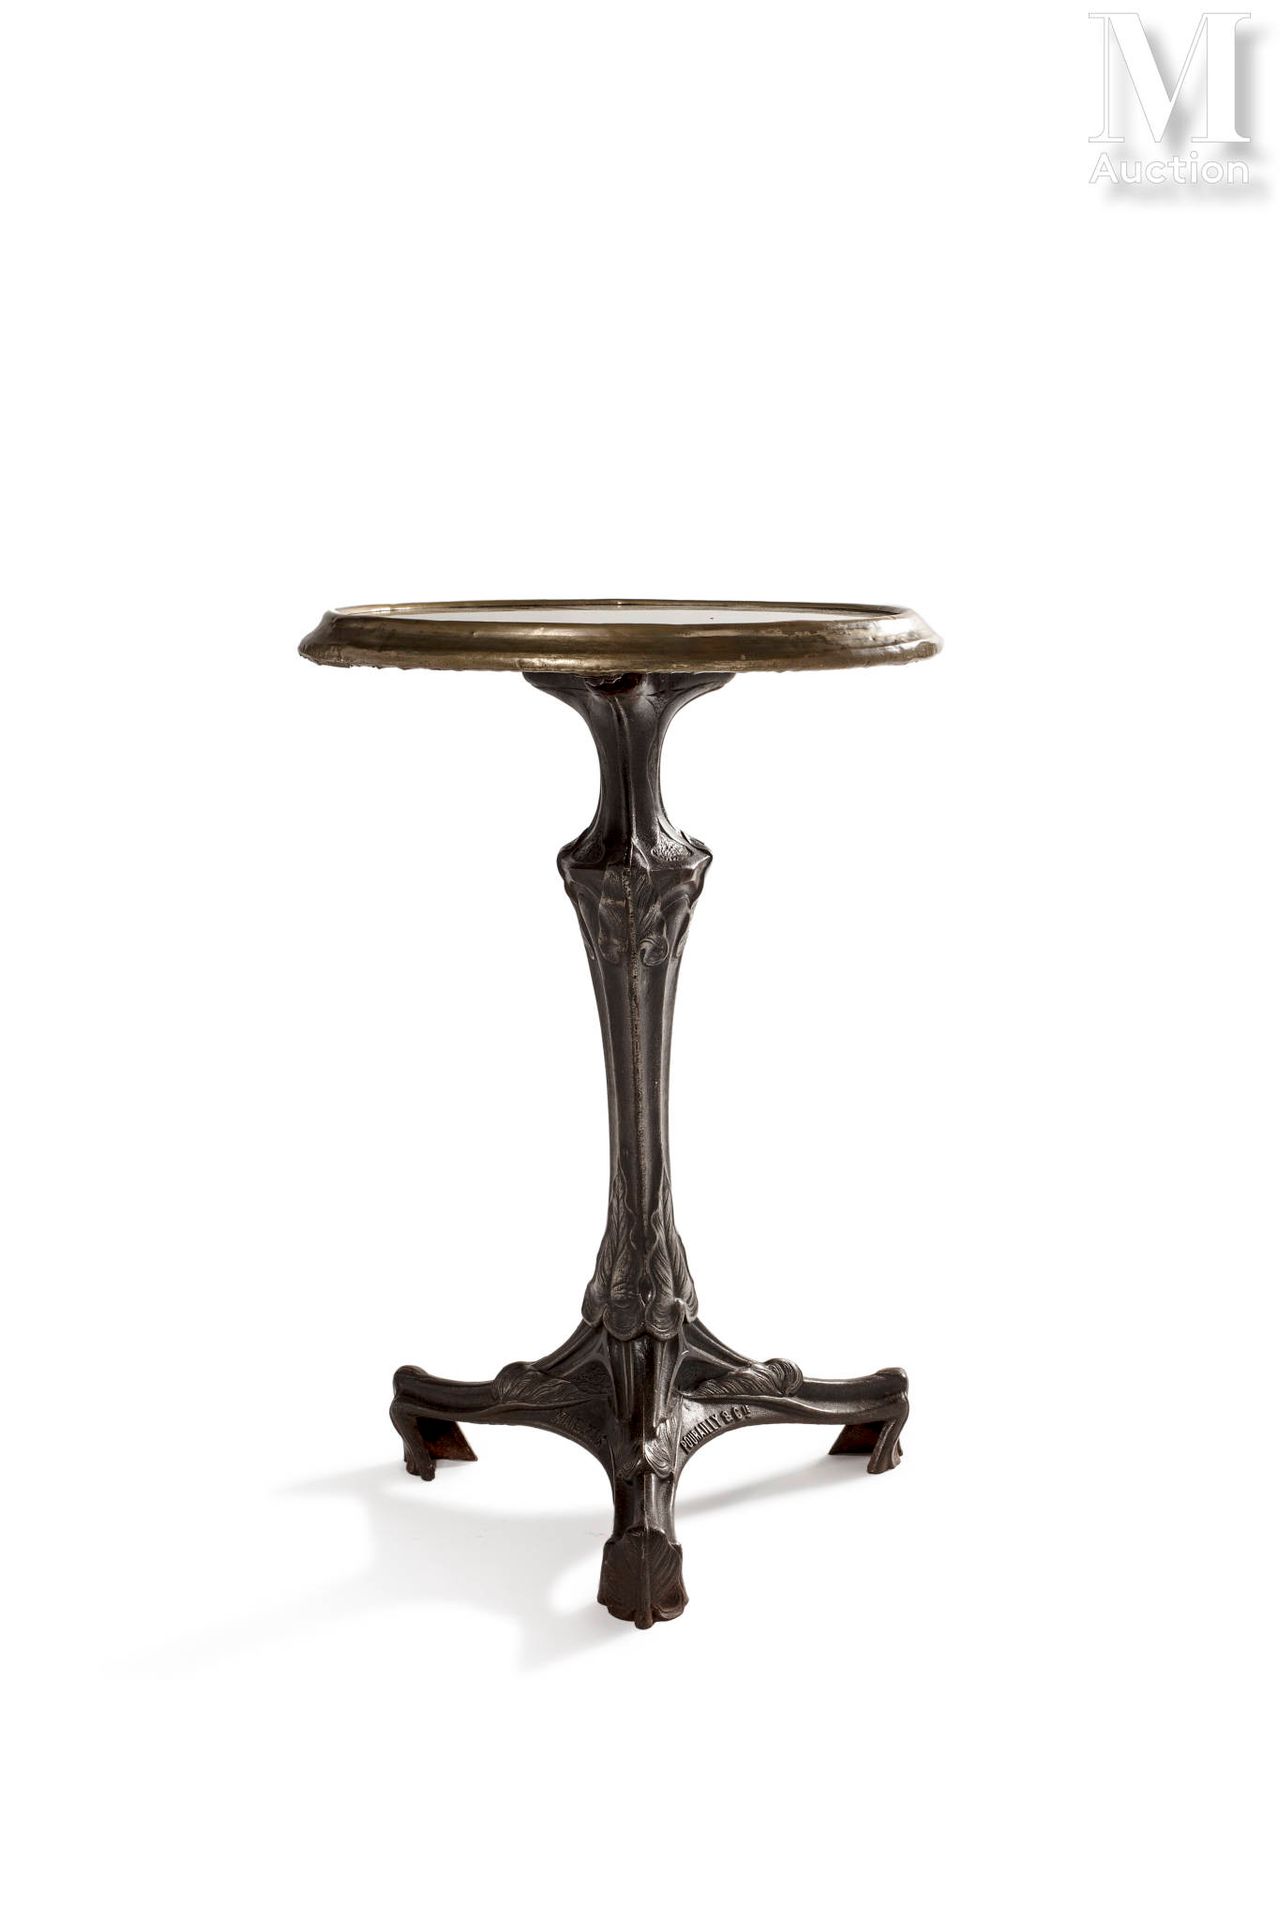 TRAVAIL ART NOUVEAU Pedestal table with a circular top made of mirrored glass re&hellip;